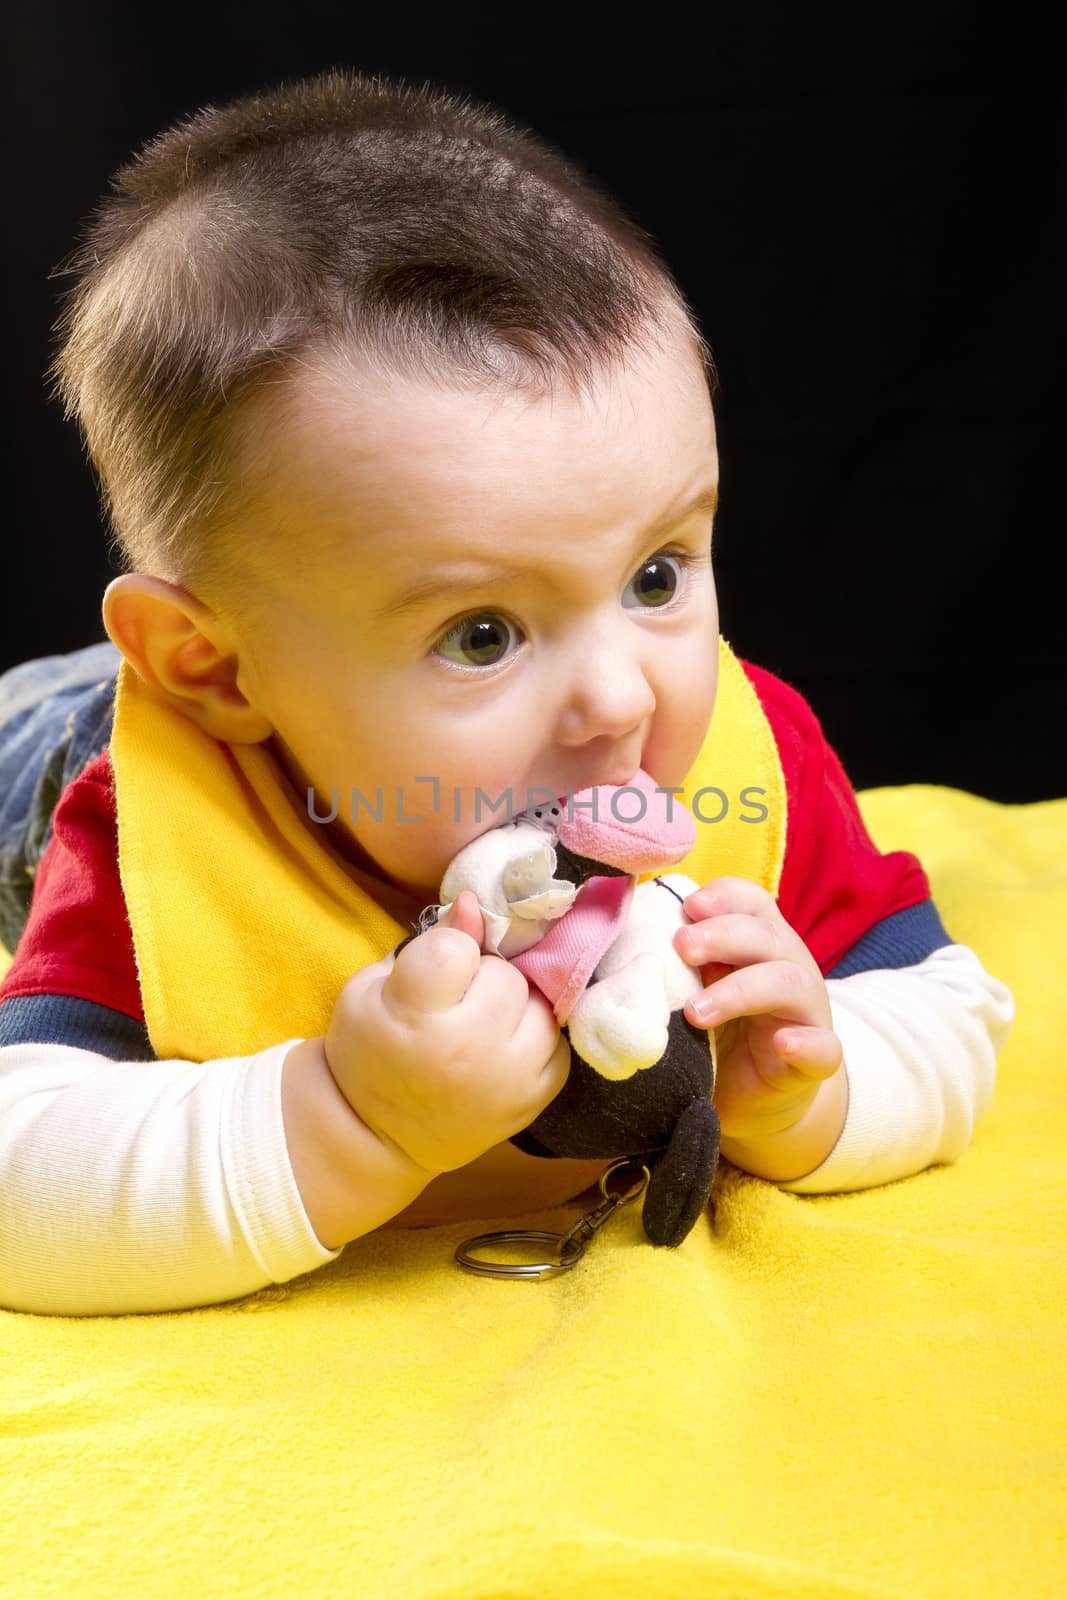 Baby boy and toy by manaemedia